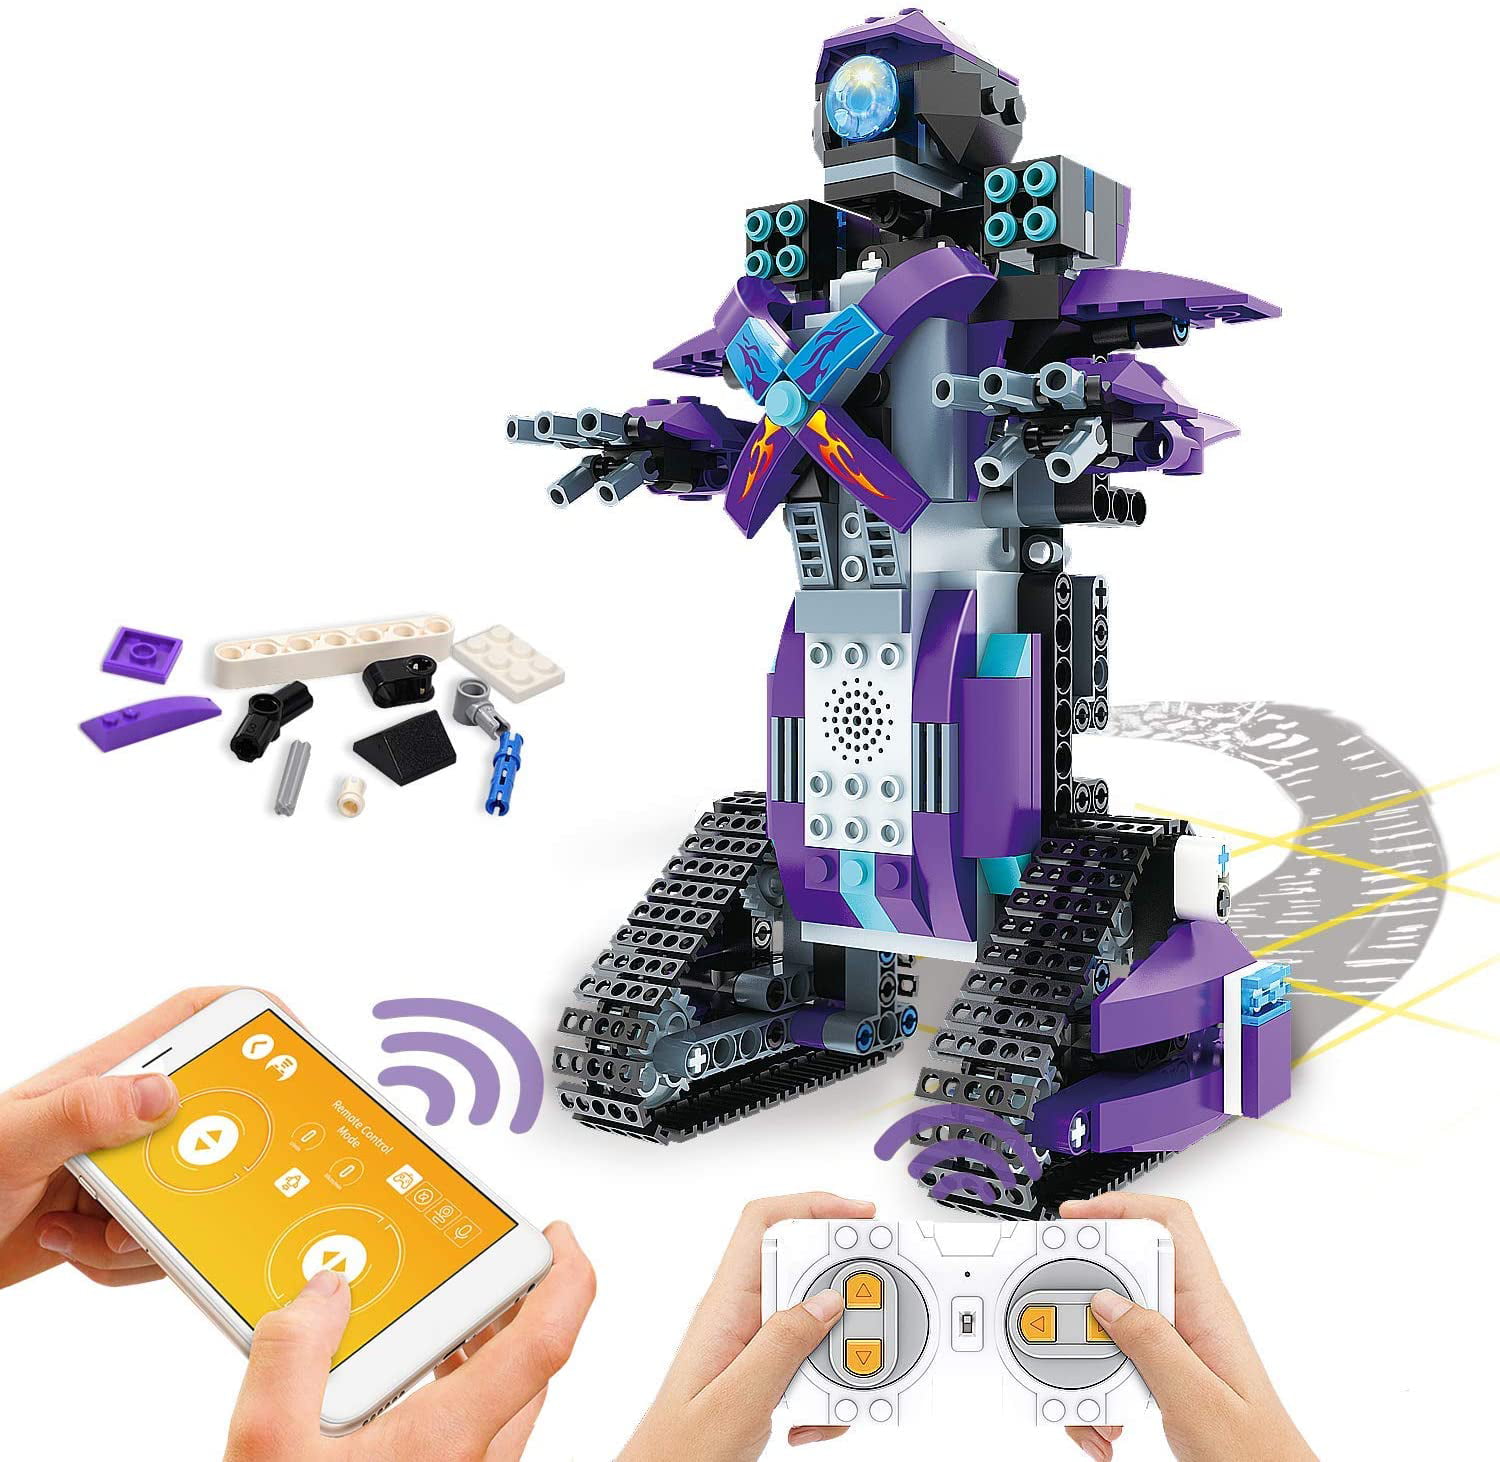 J-ouuo Building Blocks Robot Kits 392Pcs Remote Control Building Block Robot Kit with APP Control Educational Robotic Building Block Building Toys Gifts for Kids 6 7 8 9 10 11 12 13 Boys and Girls